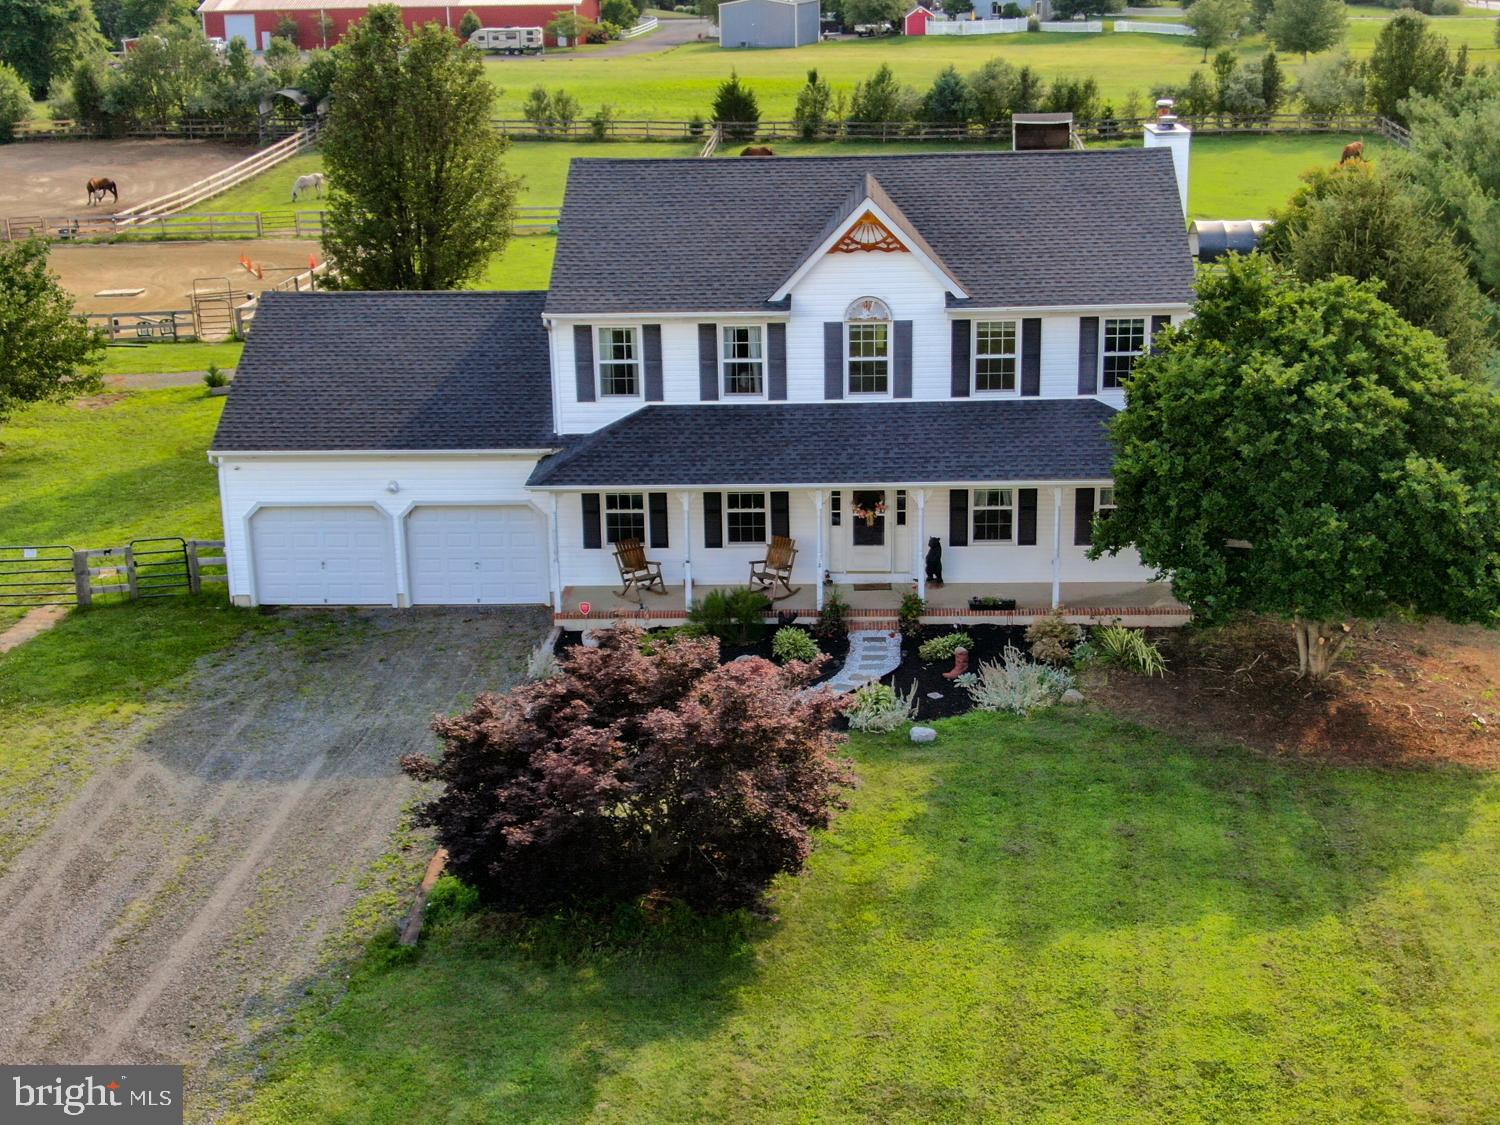 a aerial view of a house with garden